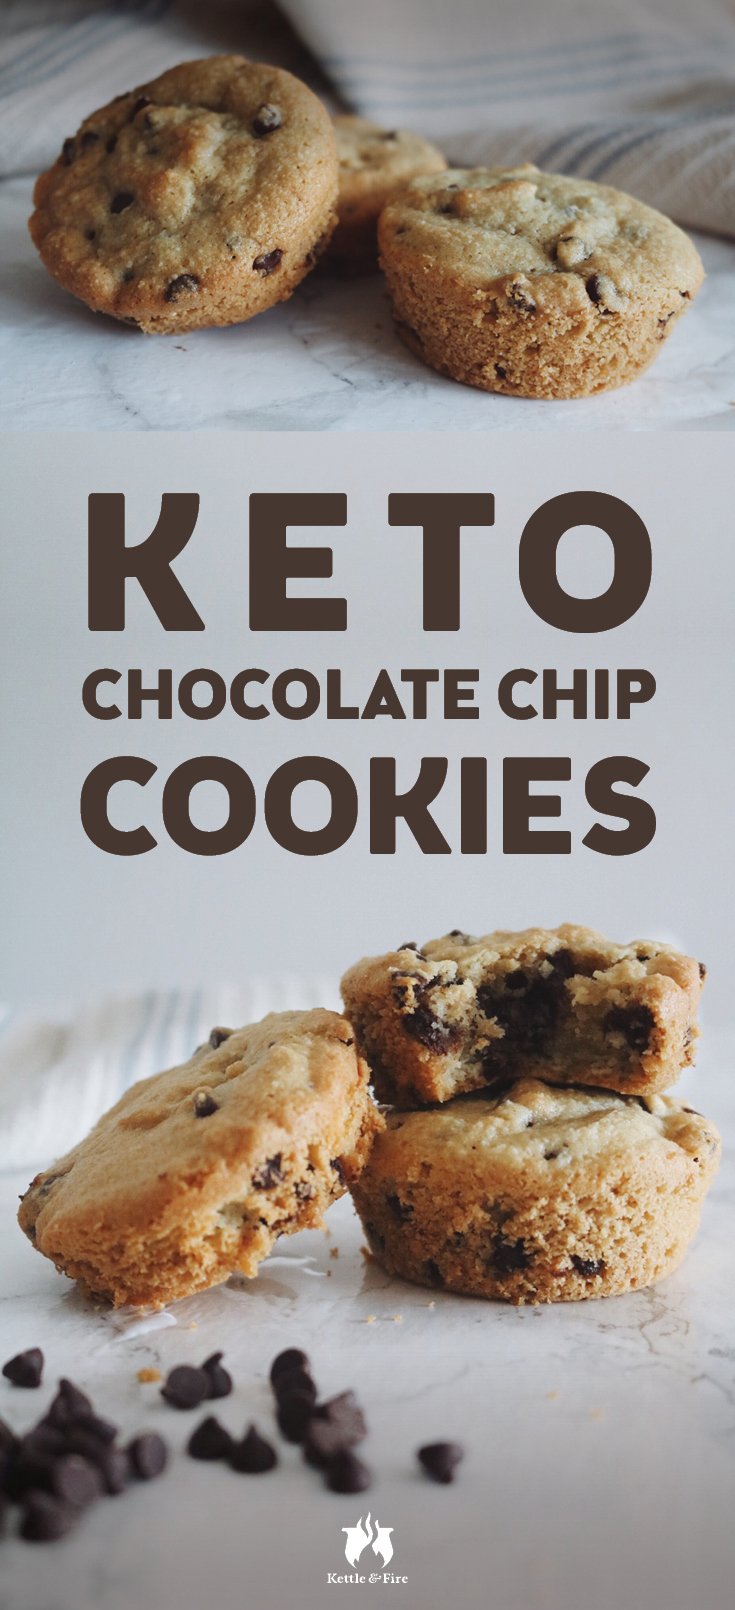 These keto chocolate chip cookies baked in a muffin tray are everything you’d want in a cookie: moist, fluffy, and melt-in-your-mouth good!